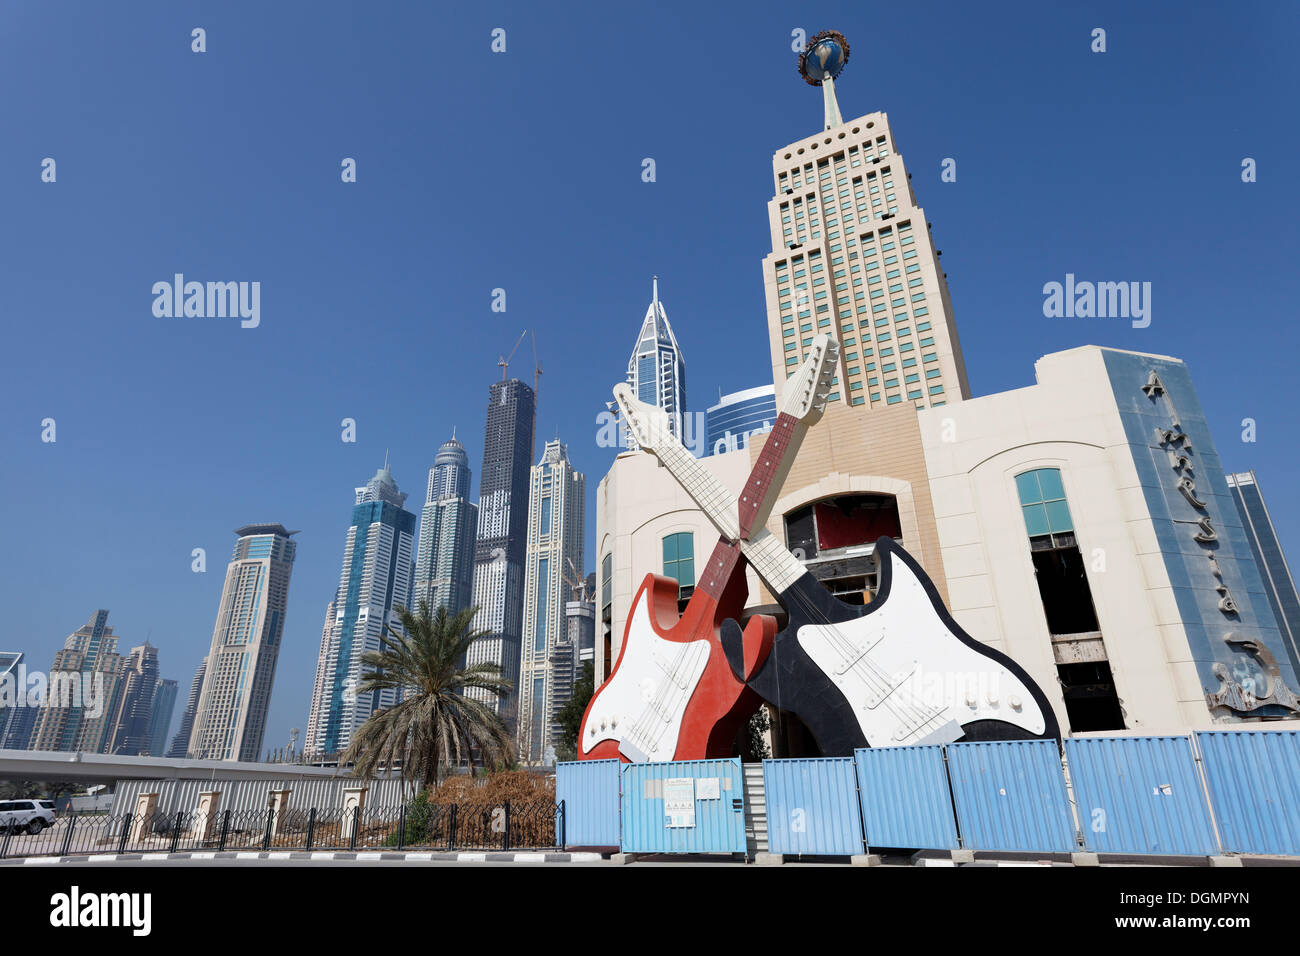 Two monumental, crossed guitars, sign for a nightclub located on Sheikh Zayed Road, Dubai, United Arab Emirates, Middle East Stock Photo